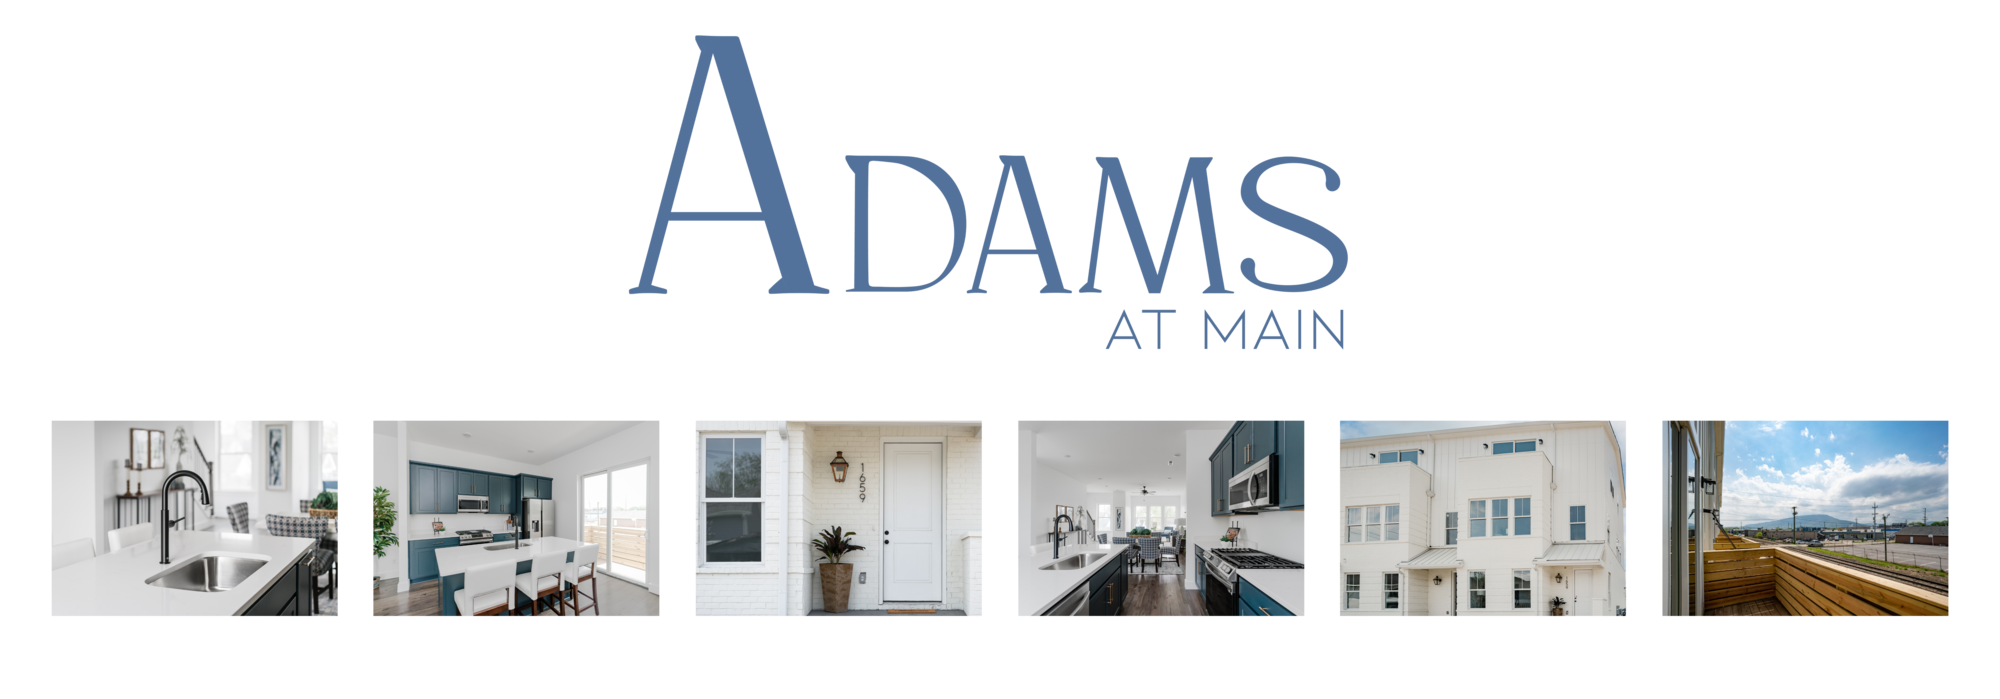 Adams at Main in Chattanooga